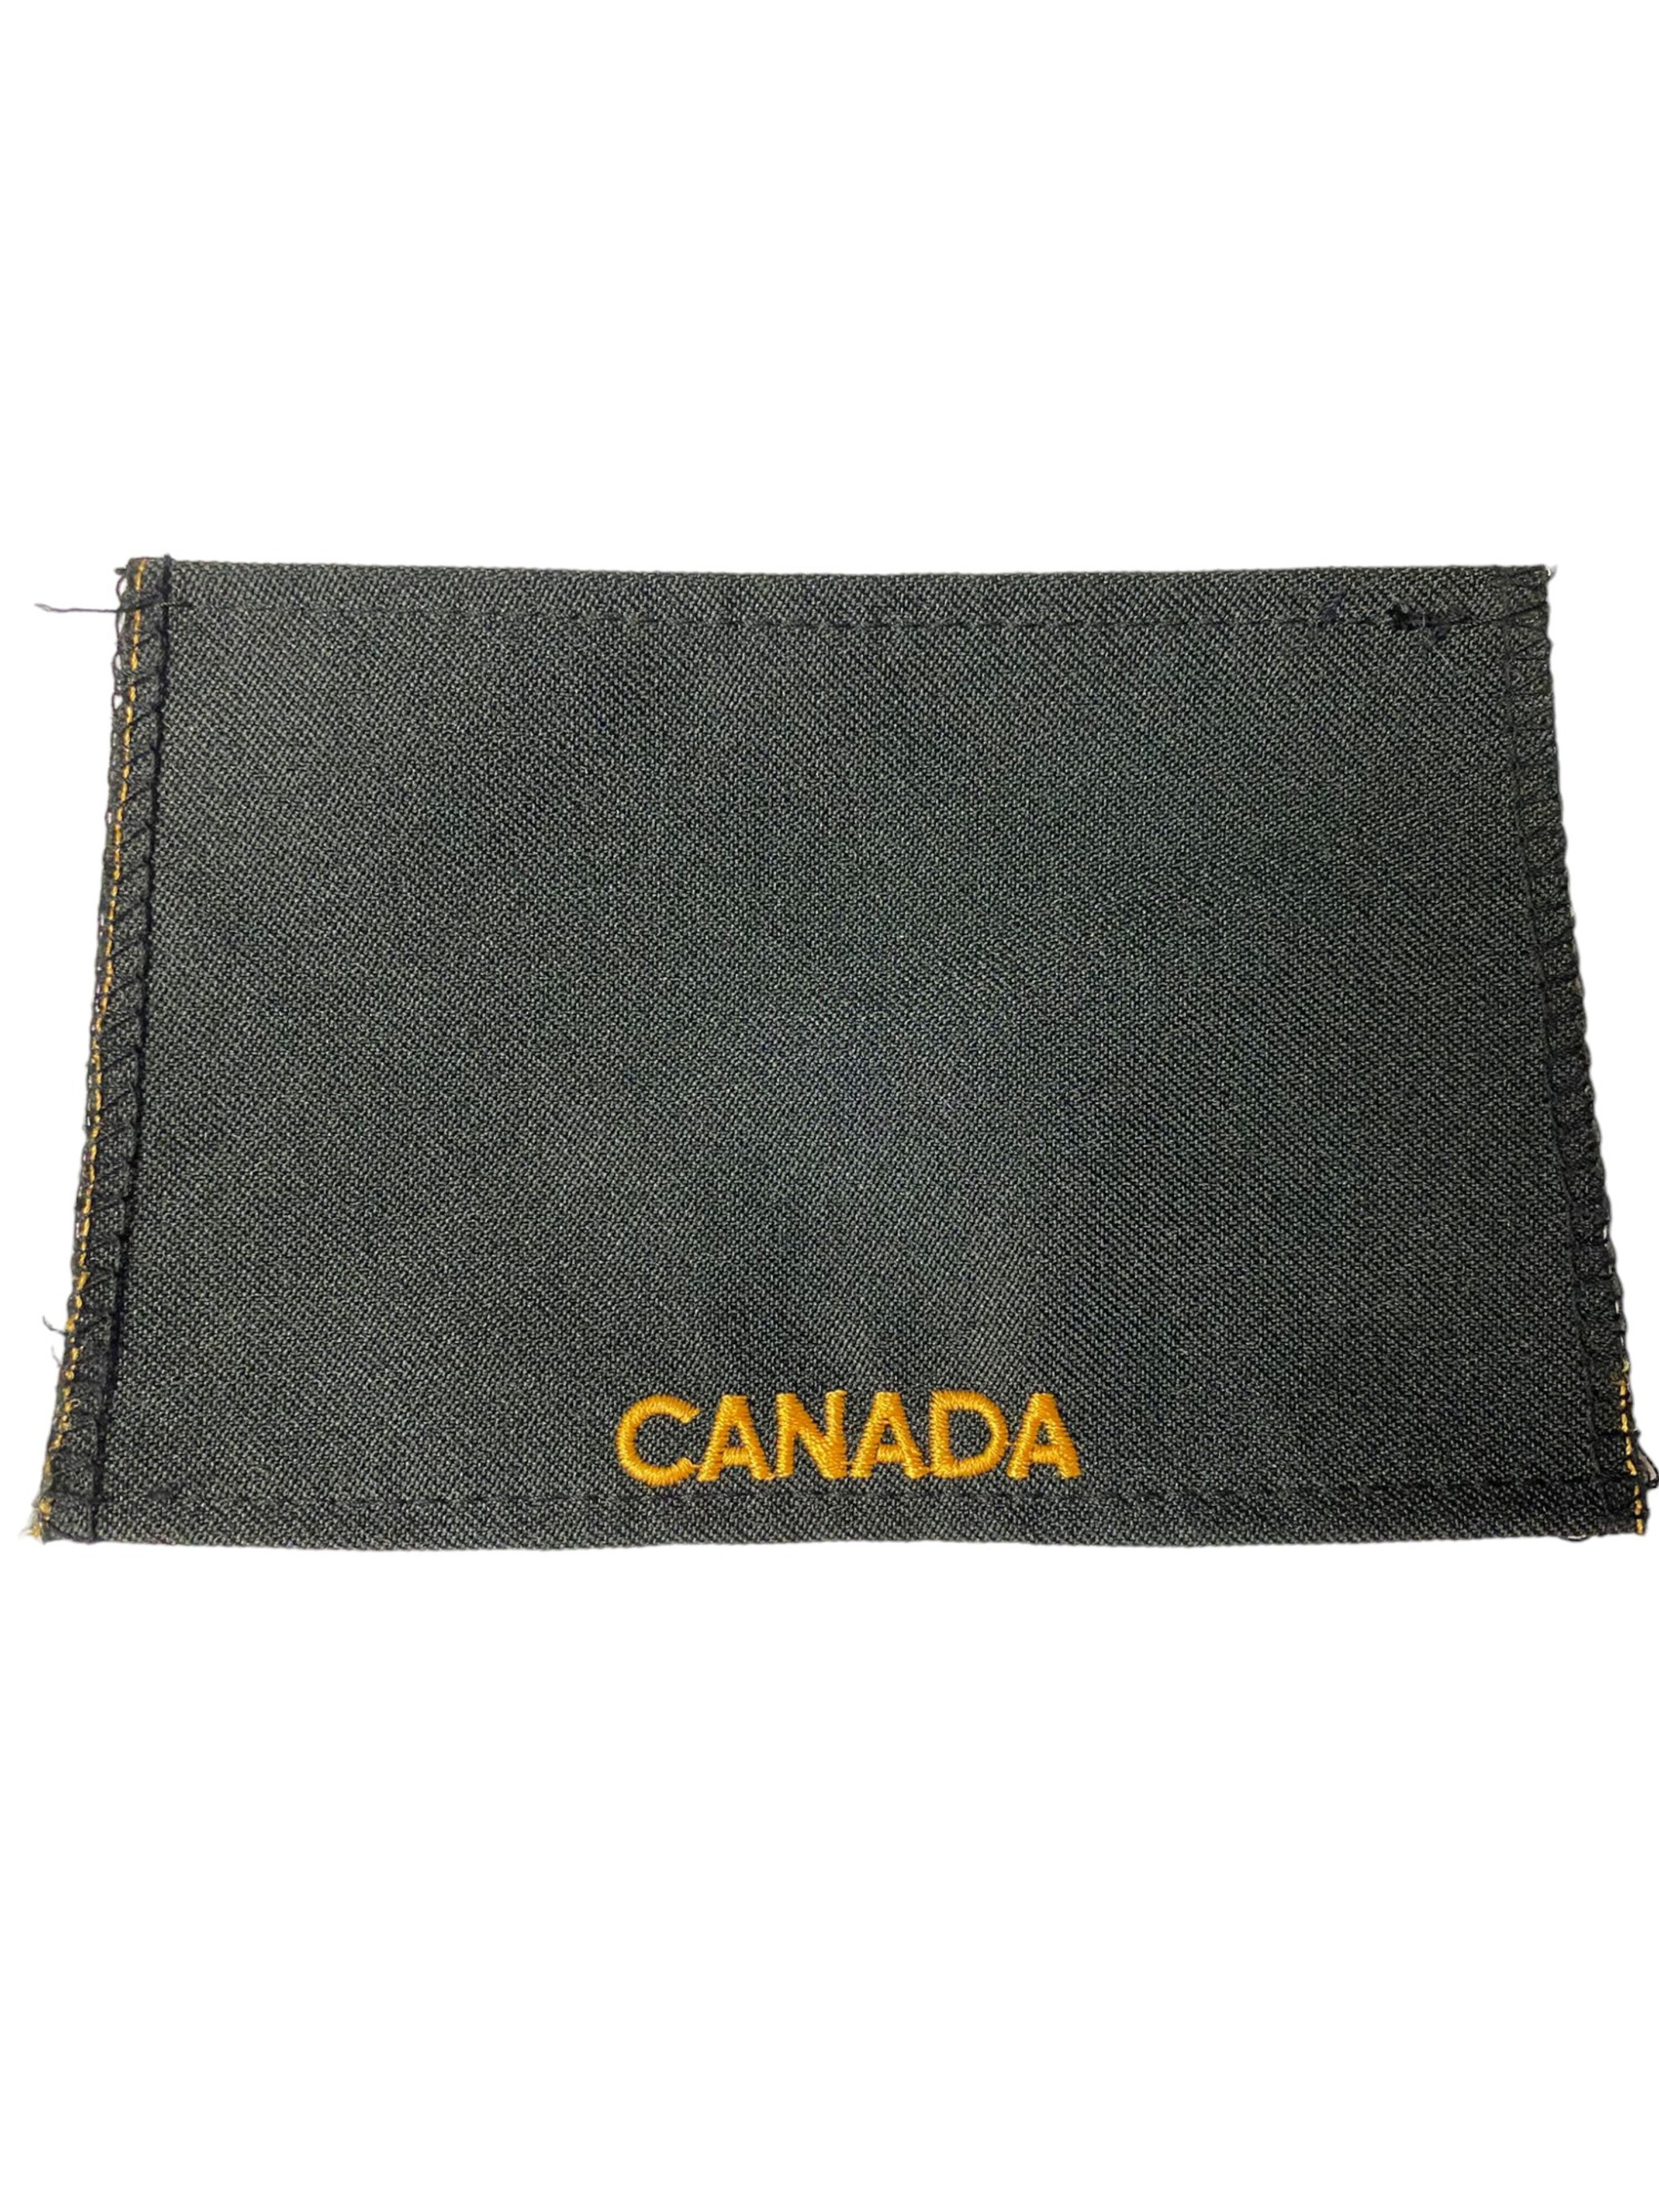 Canadian Armed Forces Rank Epaulets Army - Private Cadet Unsewn